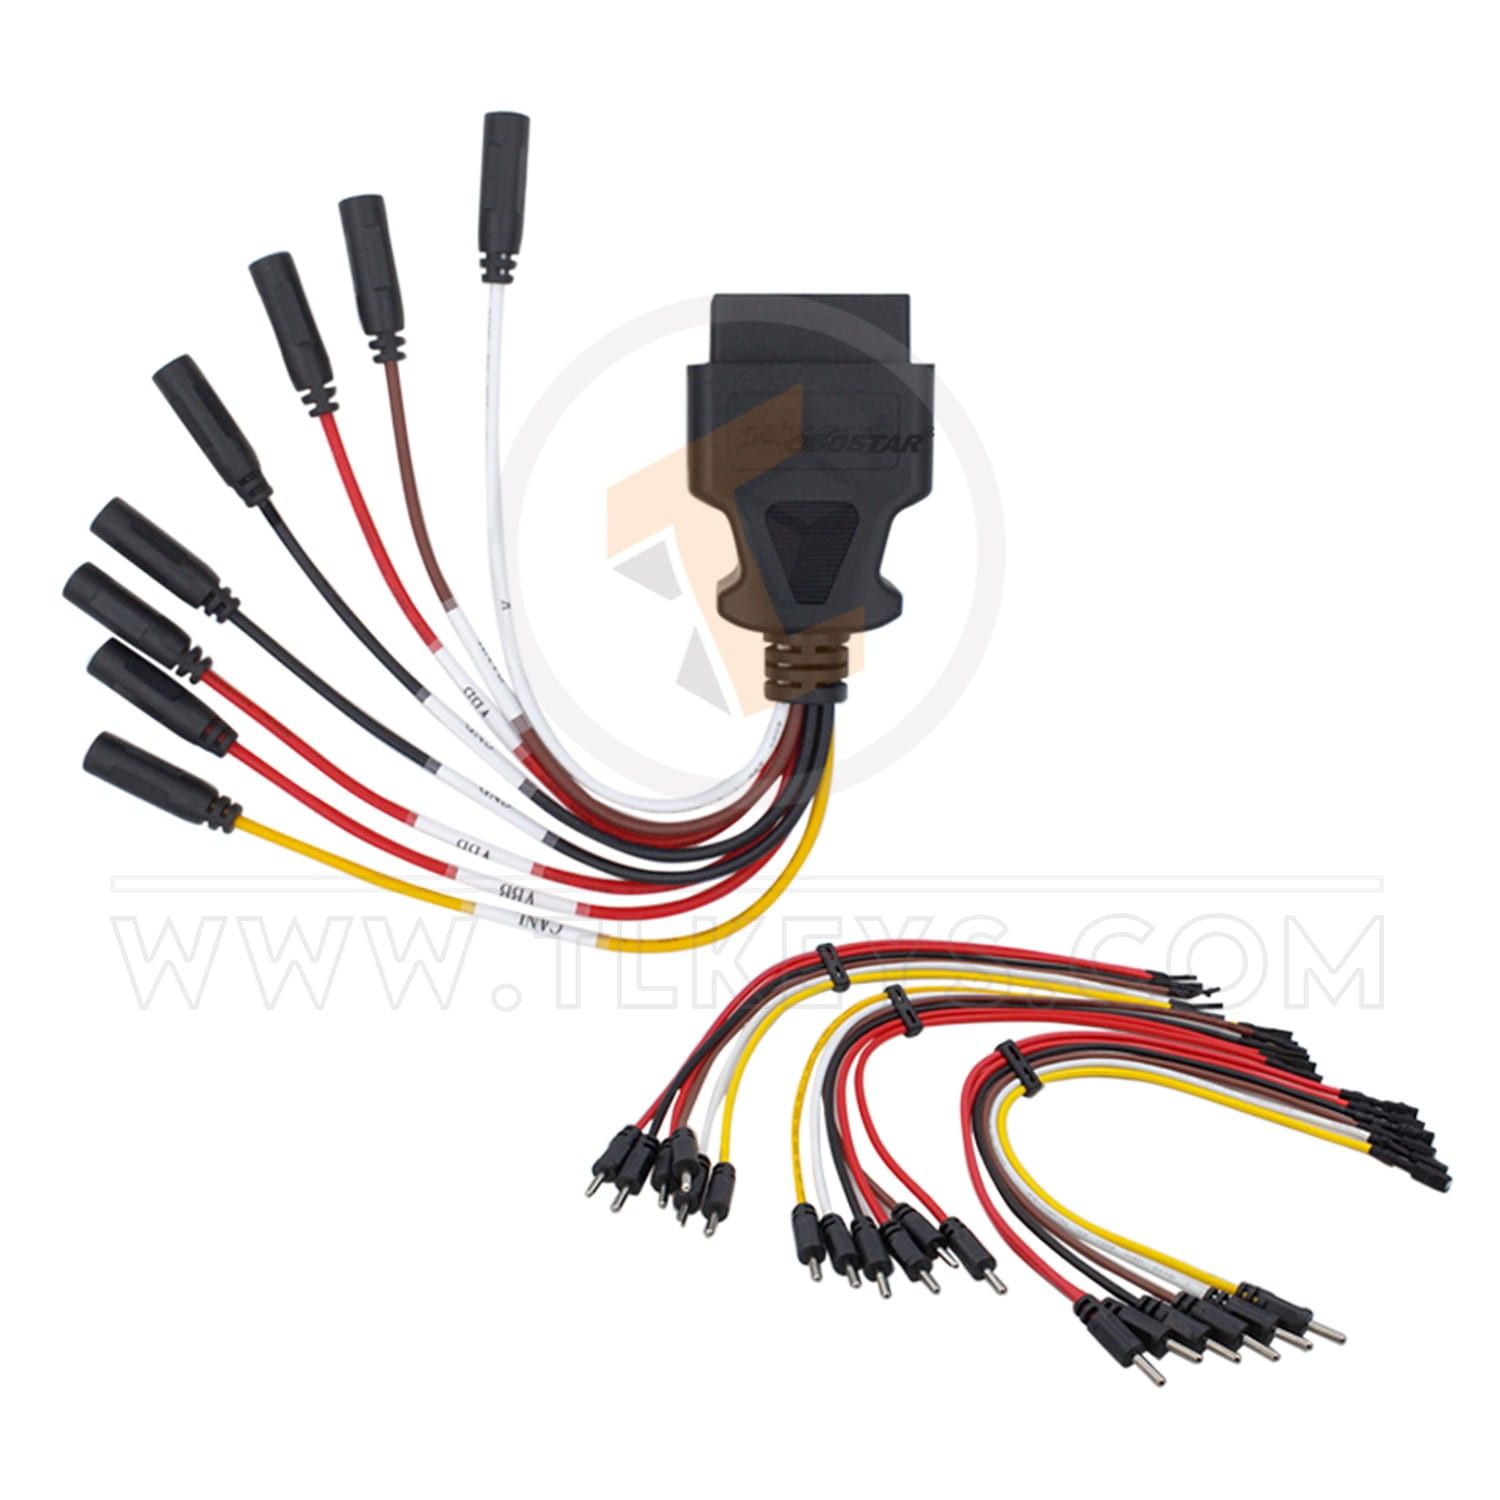 cables Multifunctional Jumper Cable